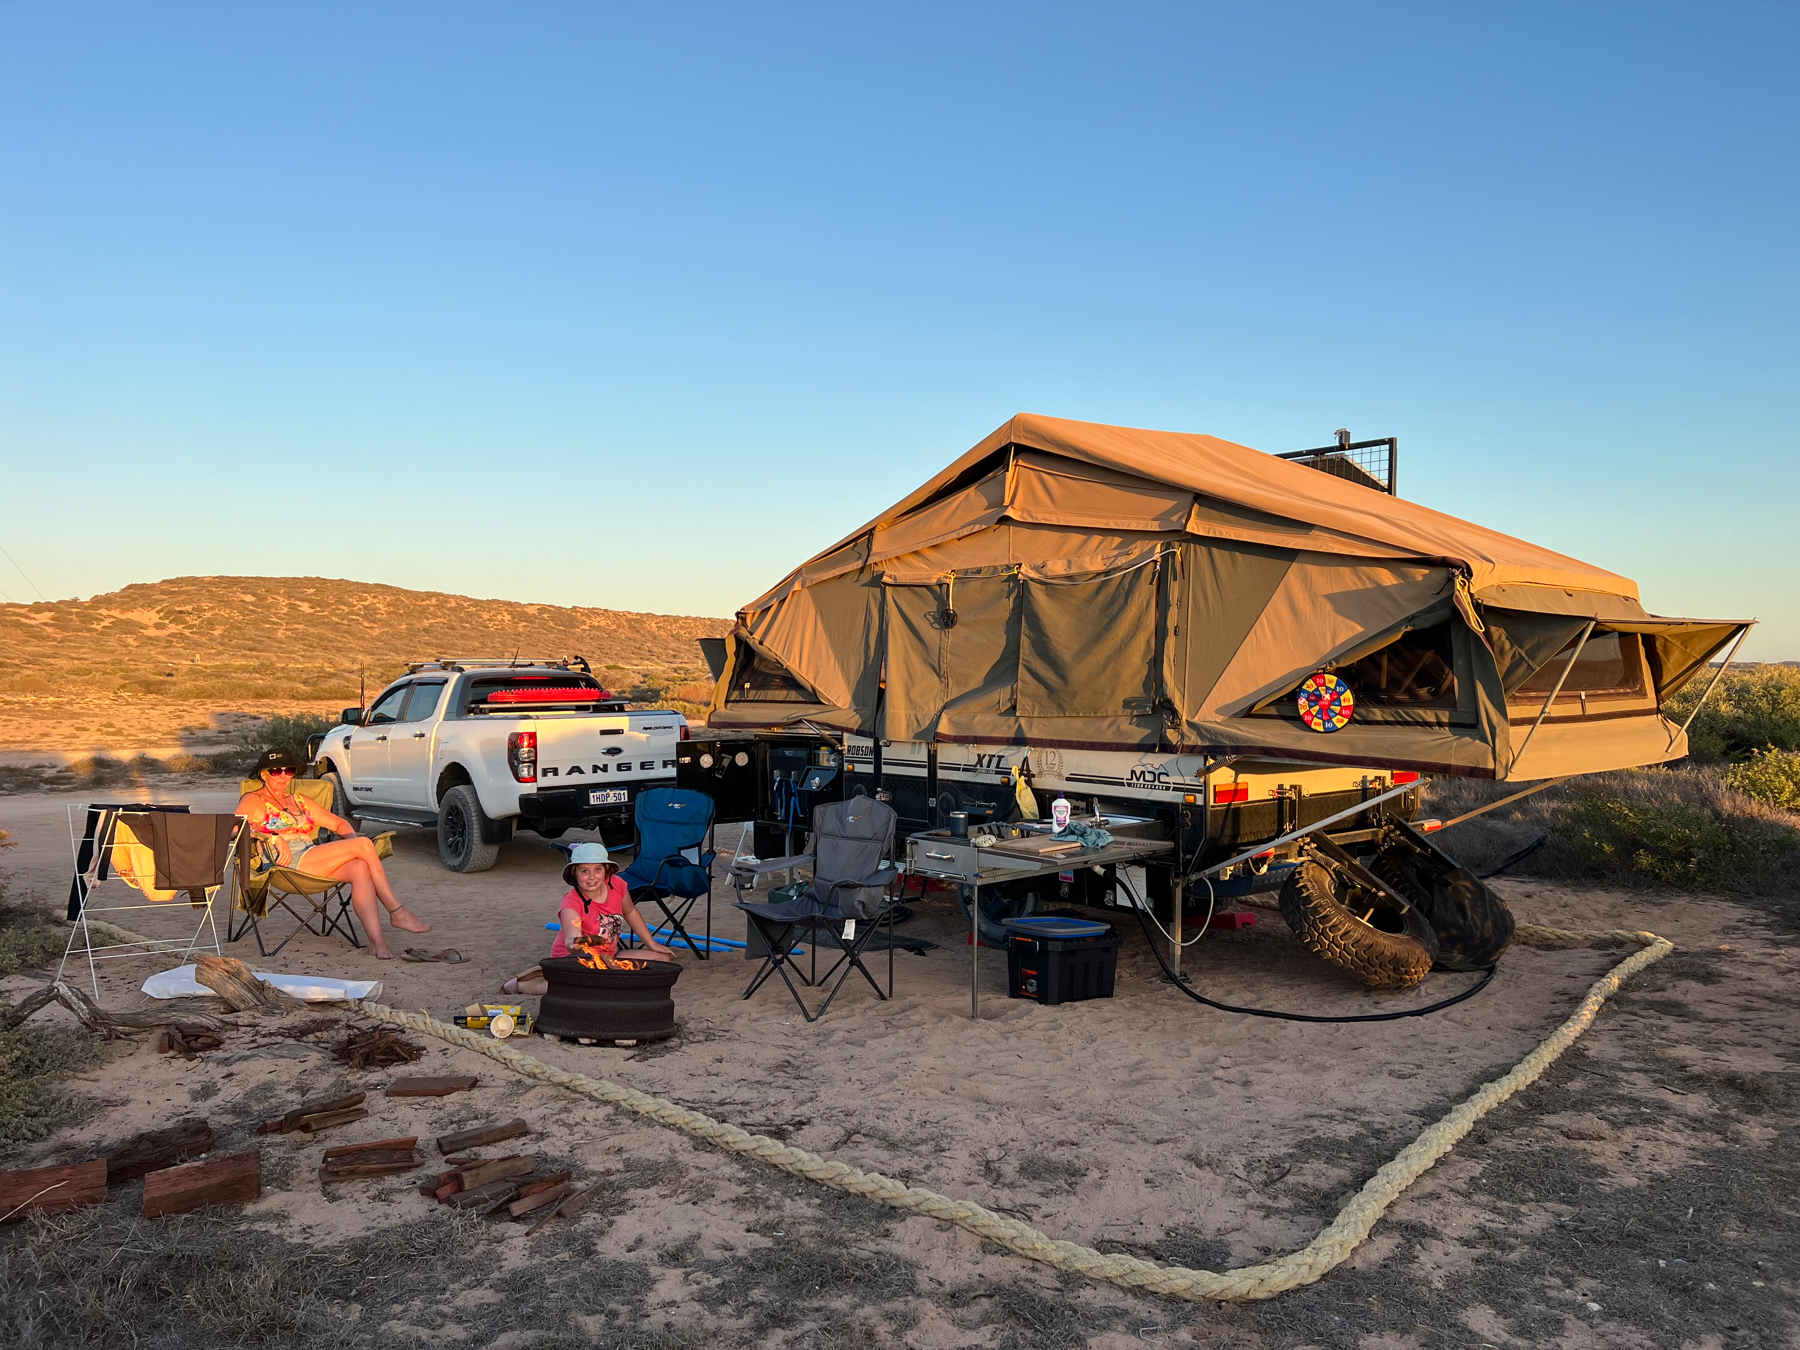 Our site at Quobba